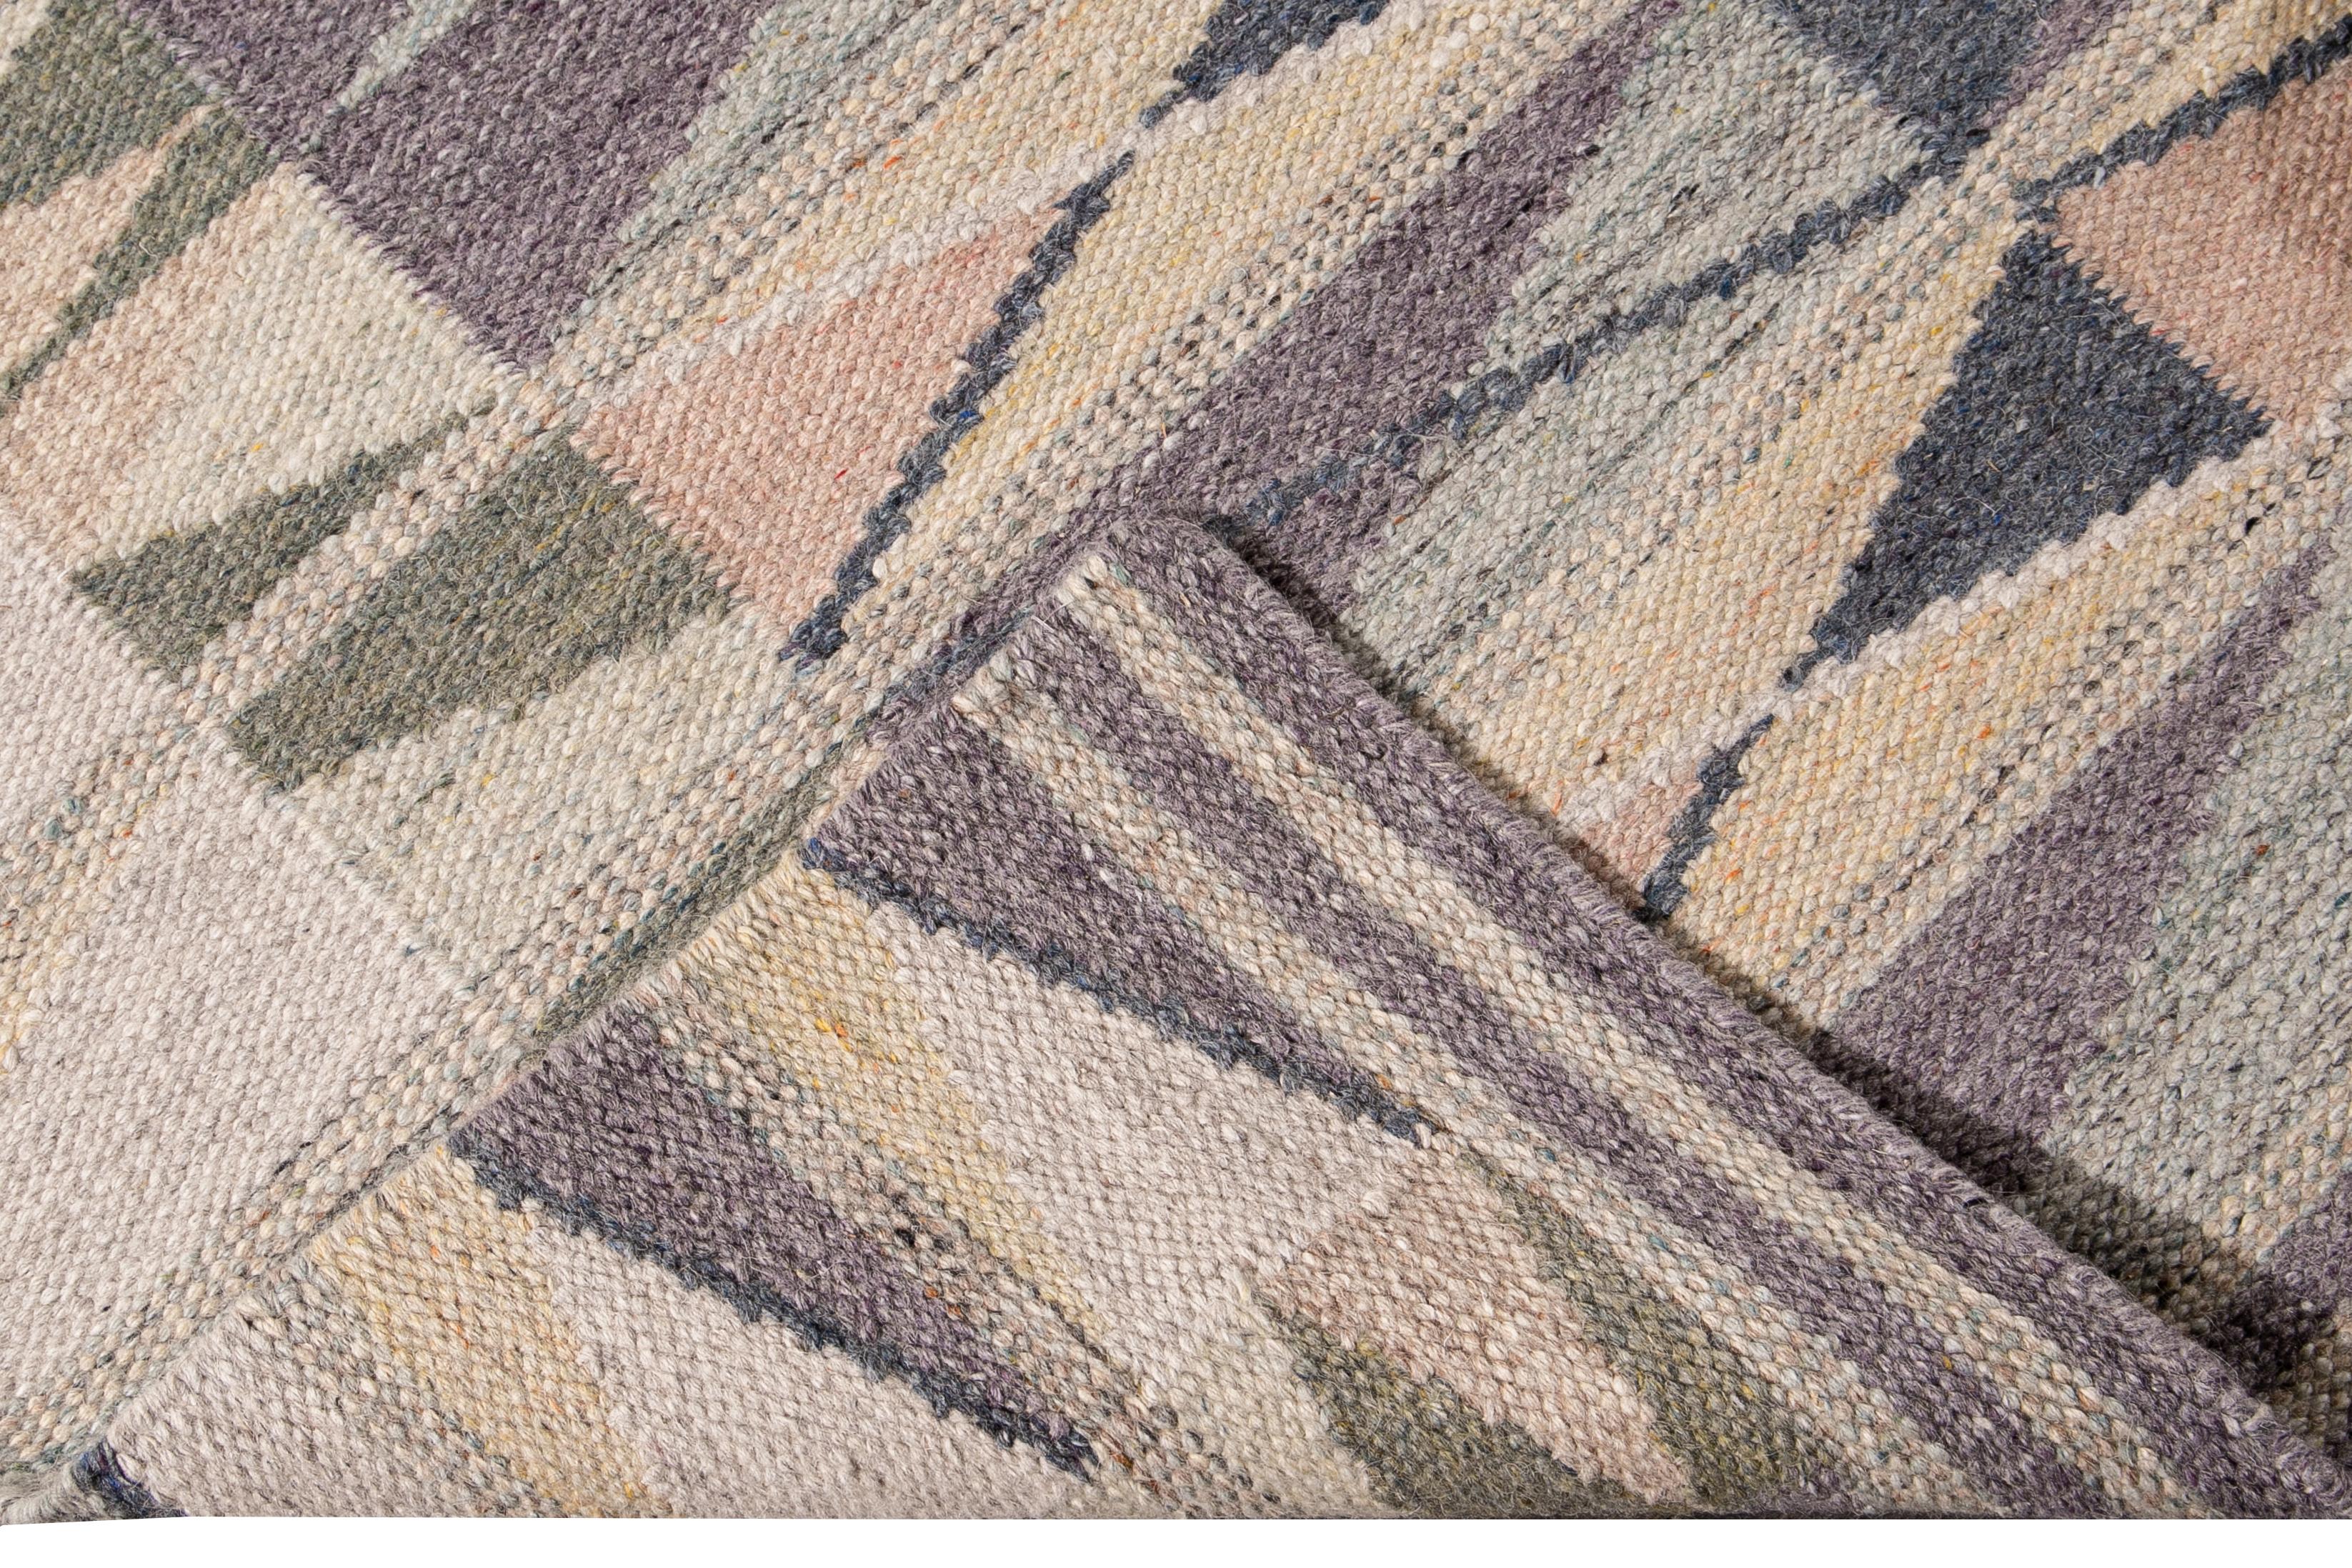 Beautiful modern long Swedish hand-knotted wool runner with a beige field. This Swedish runner has accents of peach, green, and purple in an all-over geometric abstract design.

This rug measures: 3'2